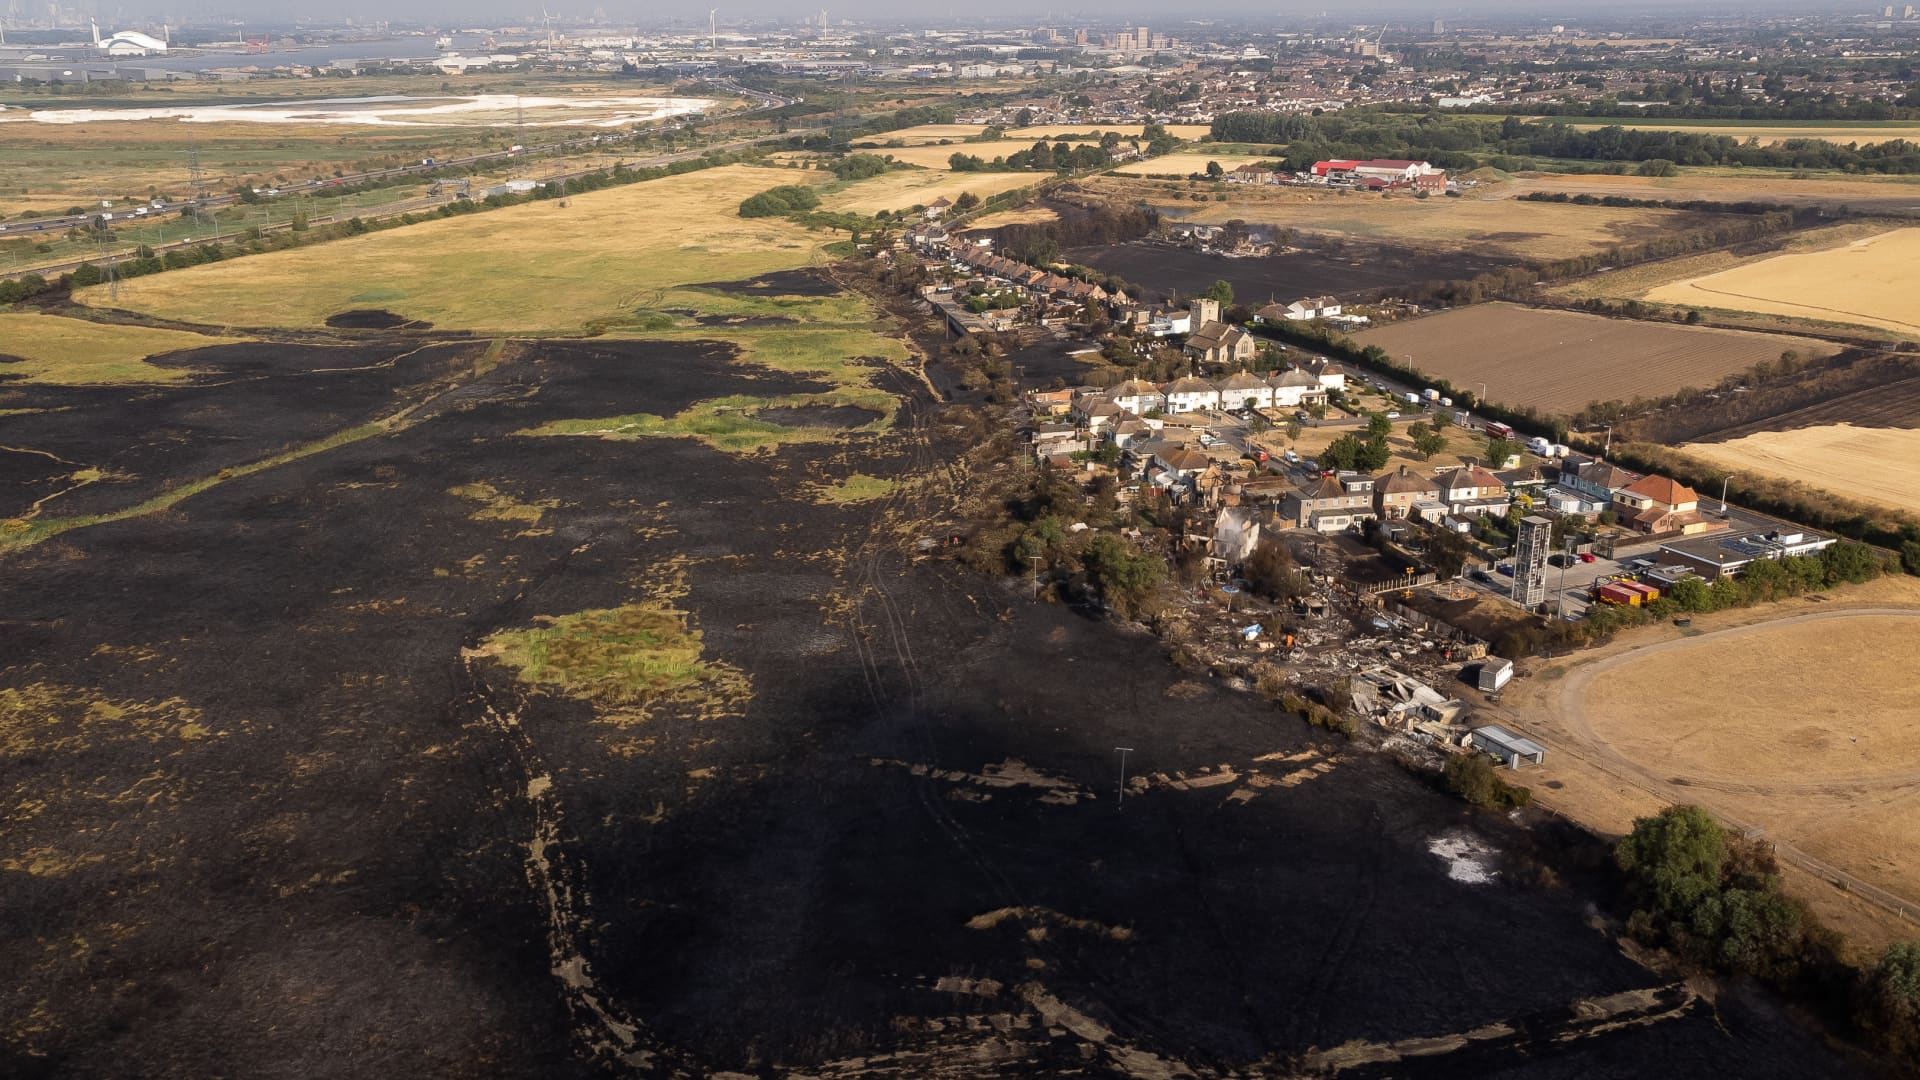 The scene after a blaze in the village of Wennington, east London after temperatures topped 40C in the UK for the first time ever, as the sweltering heat fuelled fires and widespread transport disruption. Picture date: Wednesday July 20, 2022.